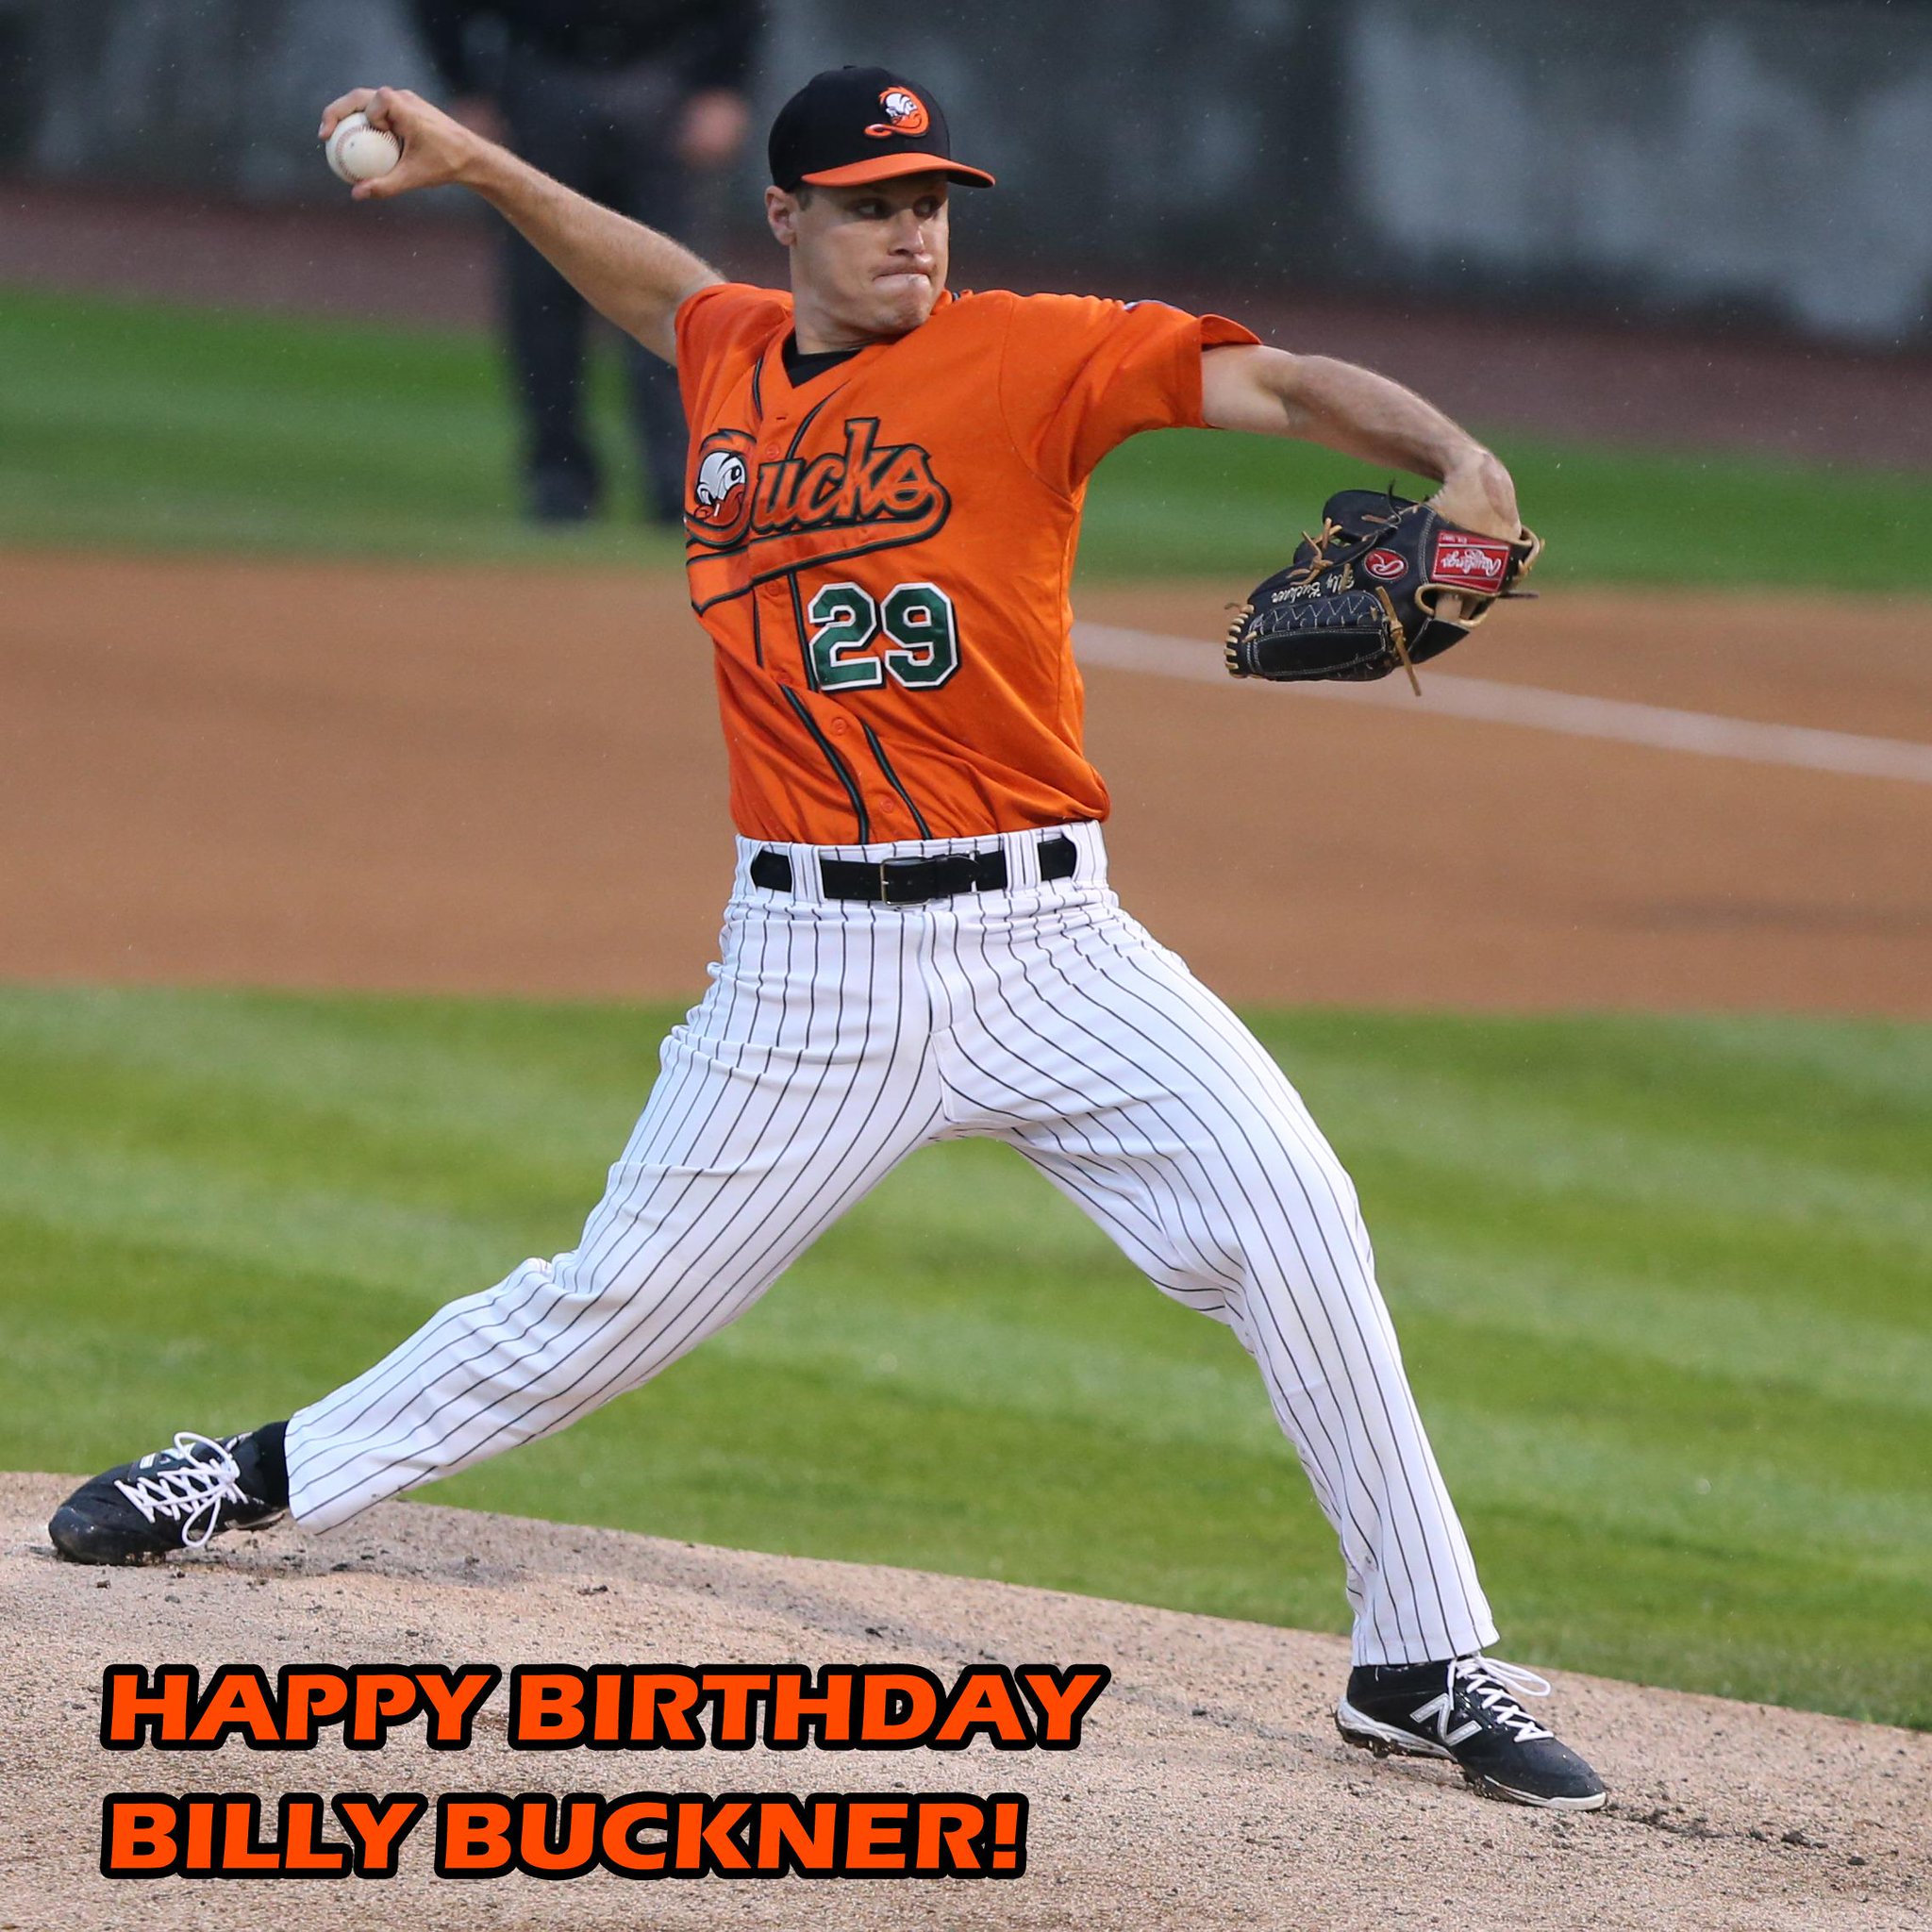 Happy Birthday to Ducks pitcher Billy Buckner! He has an 8-3 record and 73 strikeouts in 69.2 innings with the Flock! 